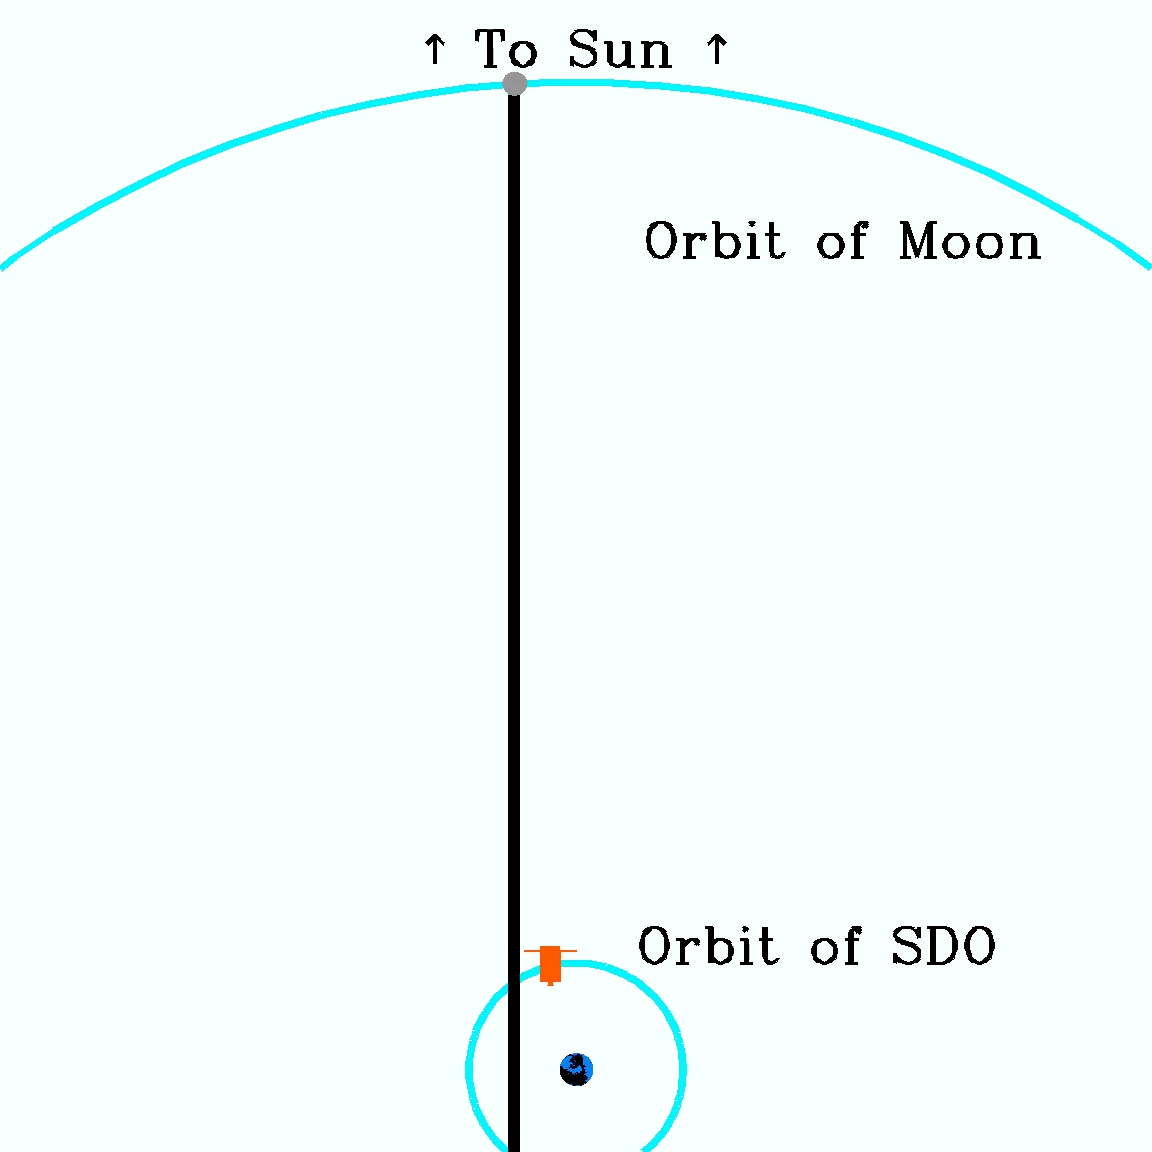 Animation depicting orbits of SDO and Moon (orbits to scale). The orbit of SDO is a small circle with the orbit of the Moon making up a much larger concentric circle. A straight vertical line orbits moves along the circumference of both.